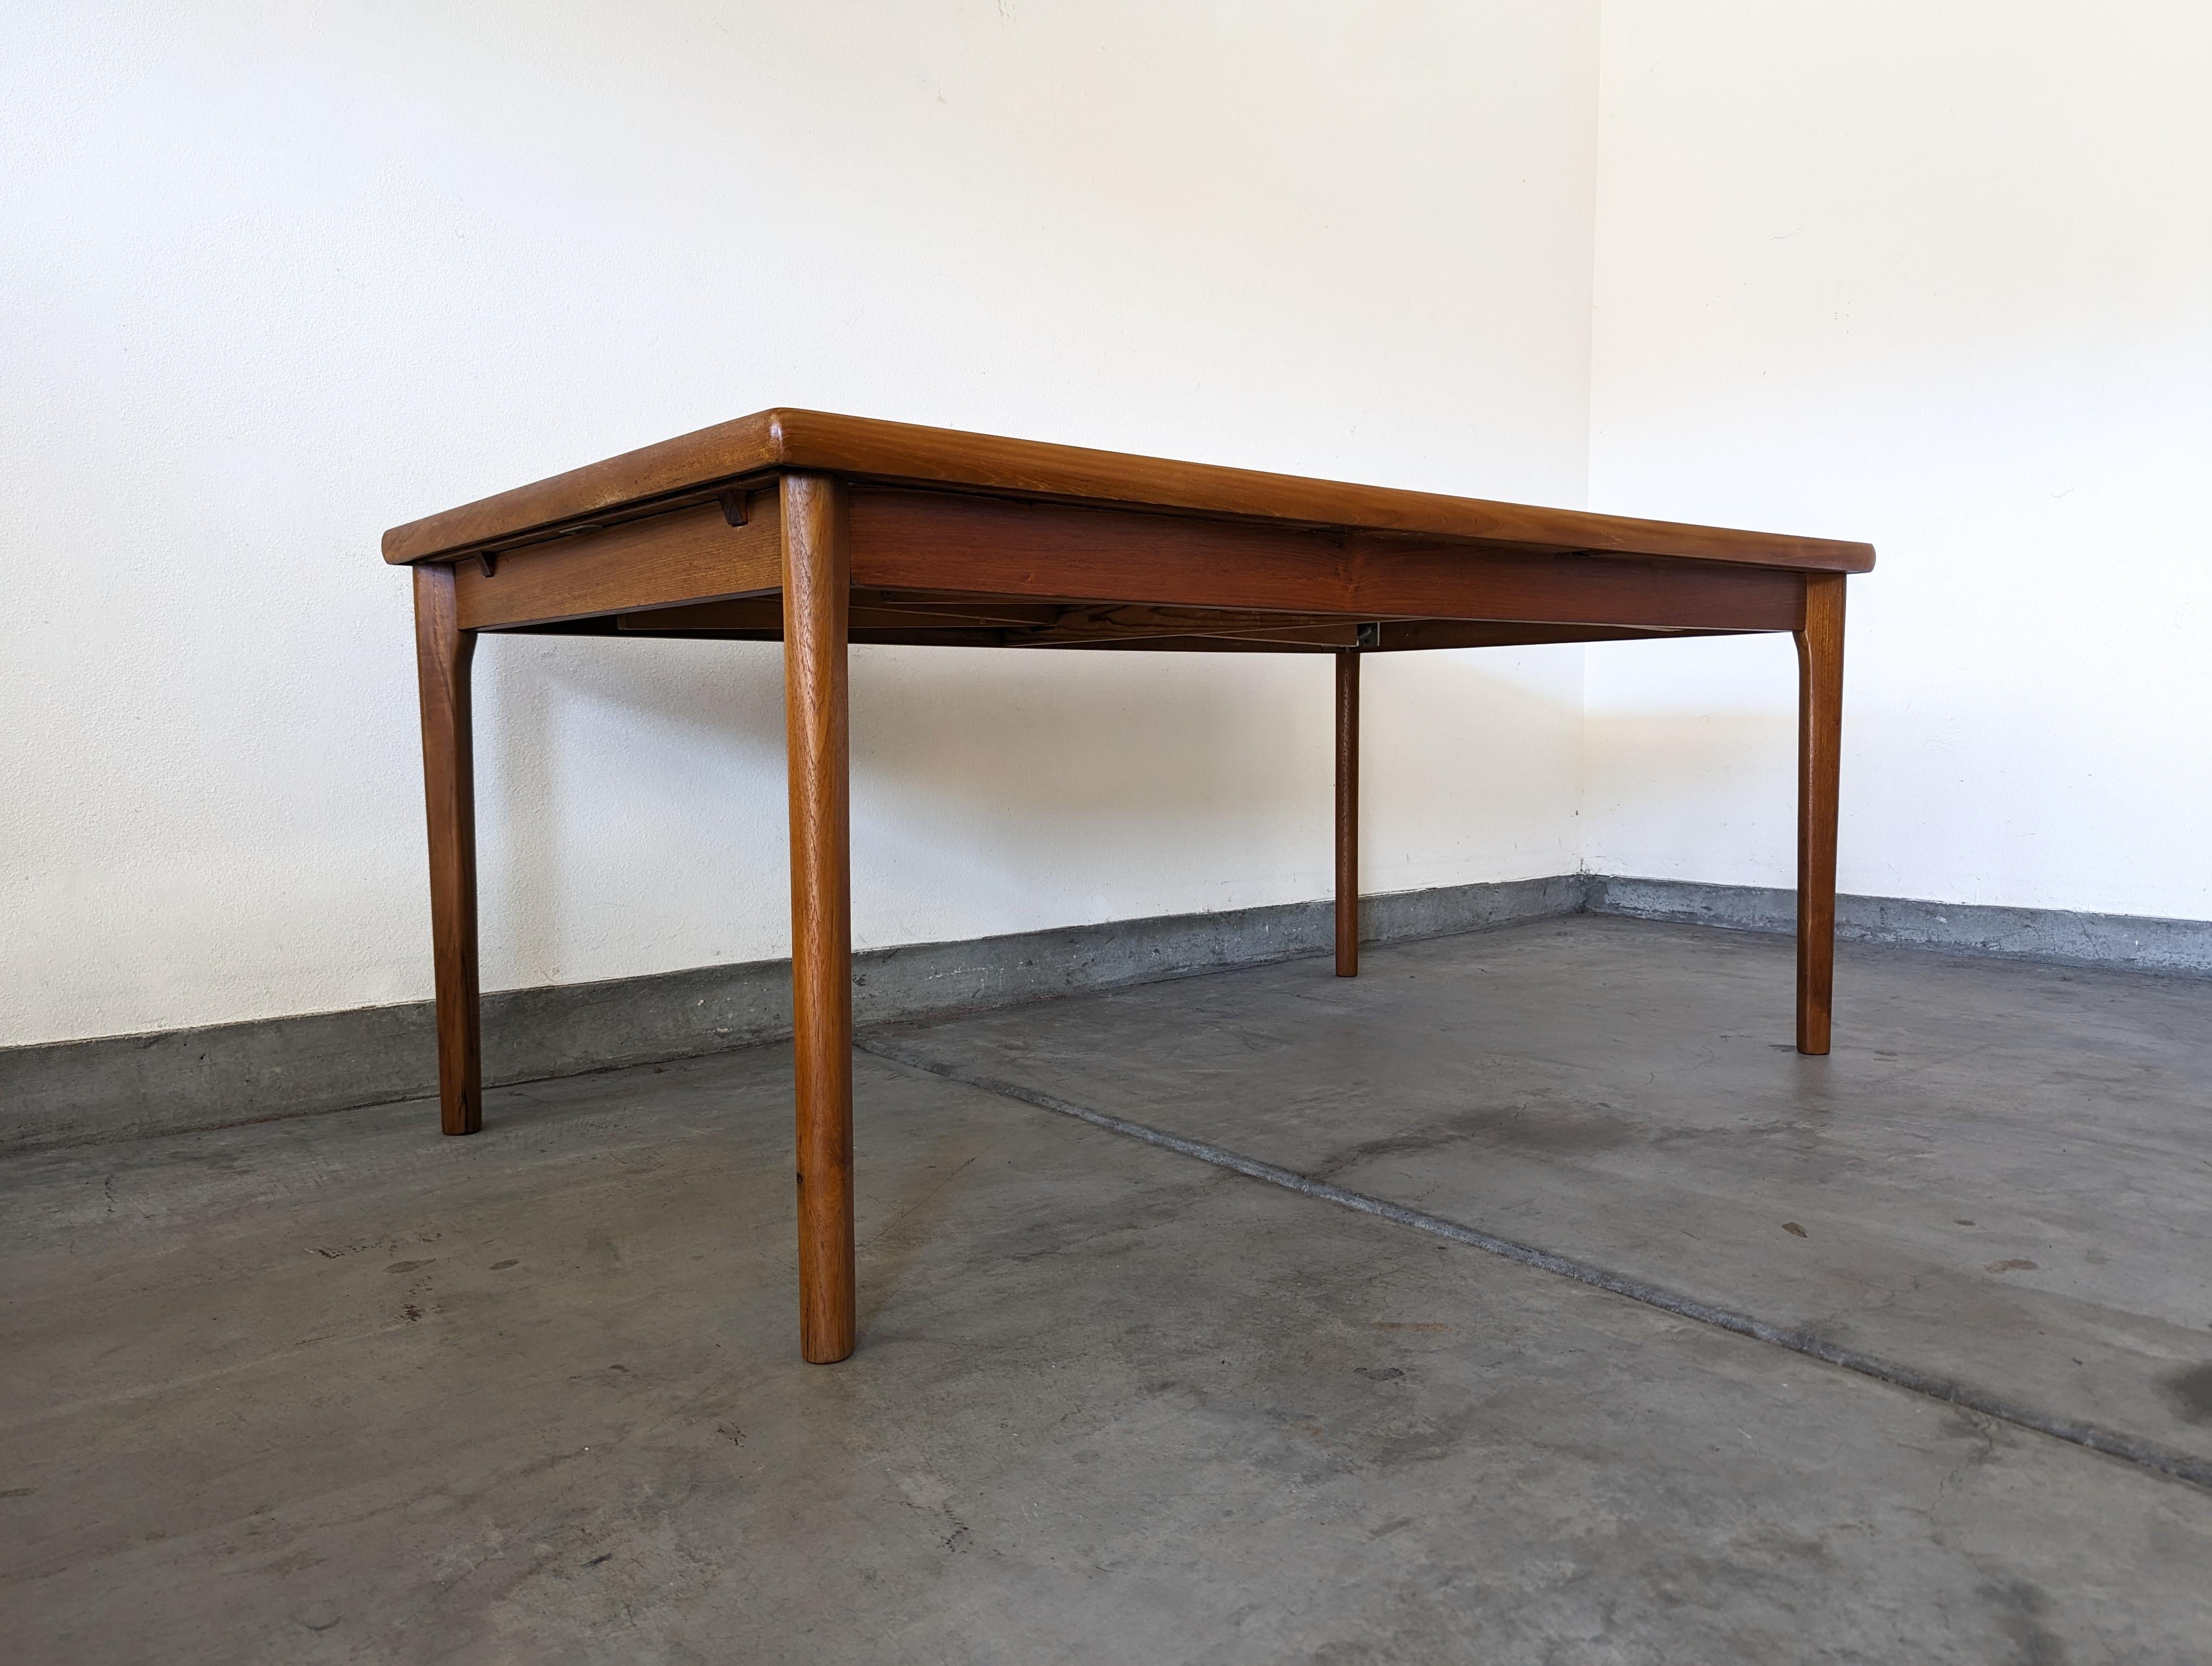 Danish Mid Century Modern Teak Extension Dining Table By Gudme, c1960s For Sale